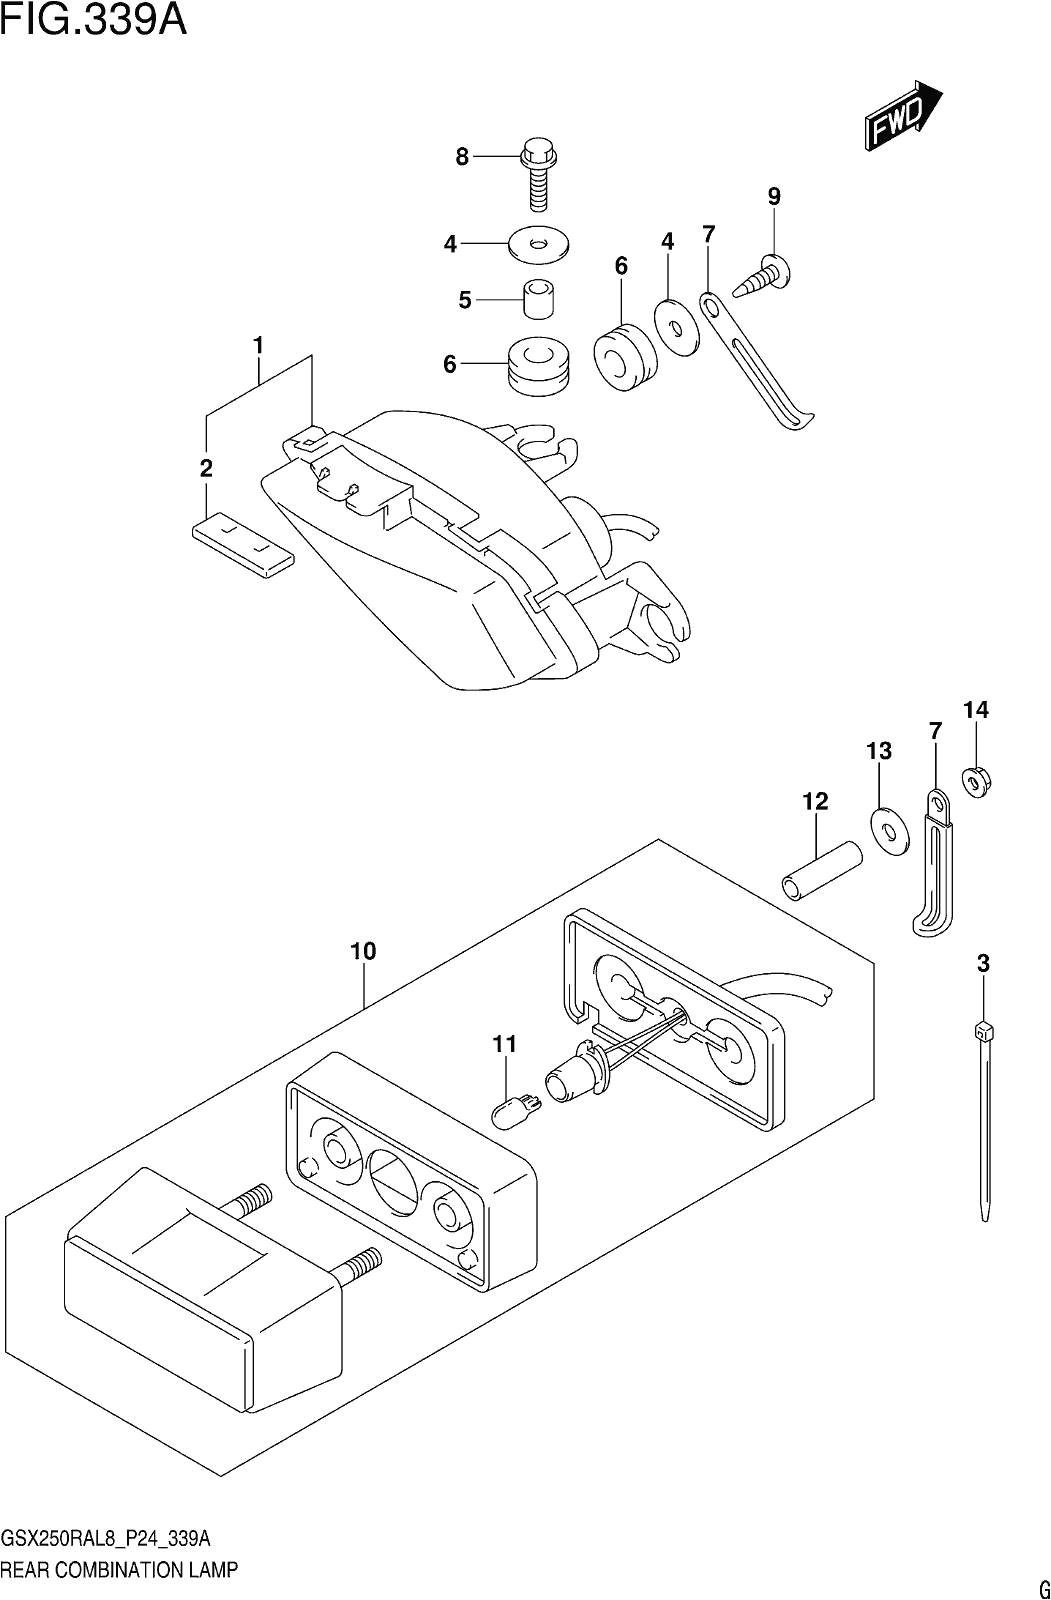 Fig.339a Rear Combination Lamp